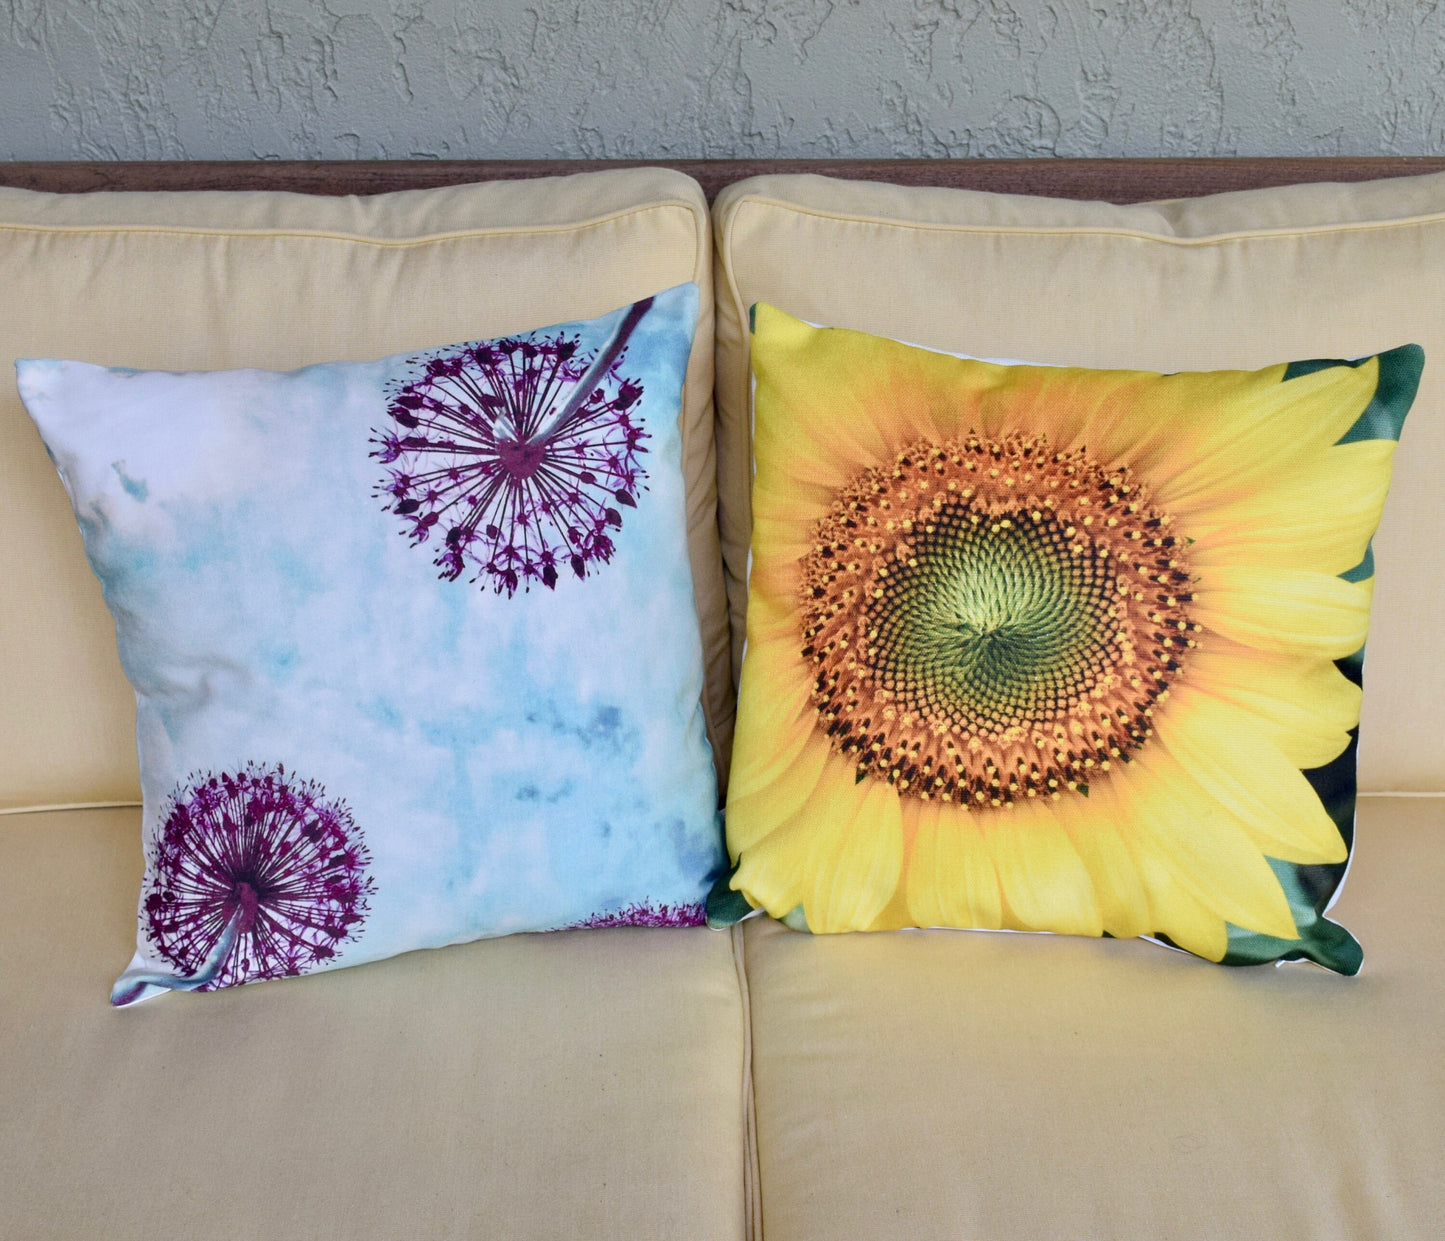 Spring Throw Pillow - Decorative Spring Flowers Pillow and Cover